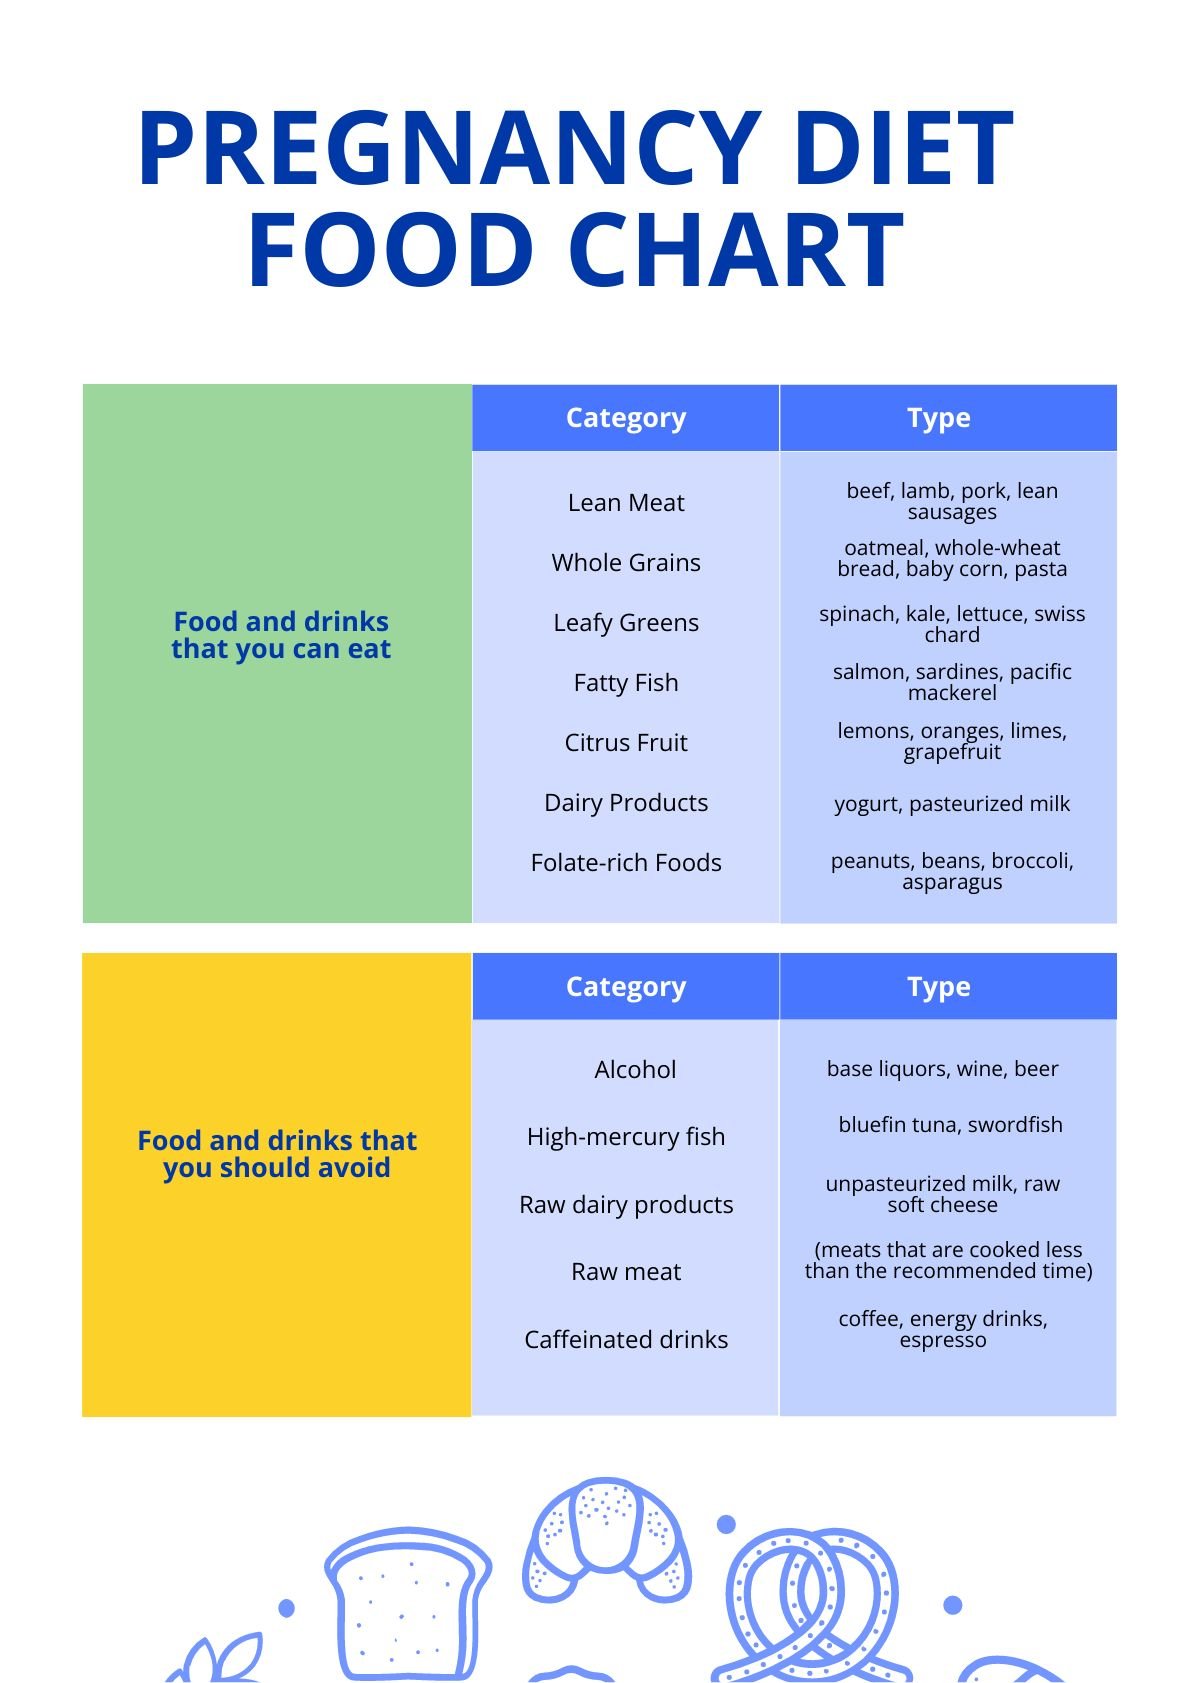 First Trimester Pregnancy Food Chart in PDF - Download